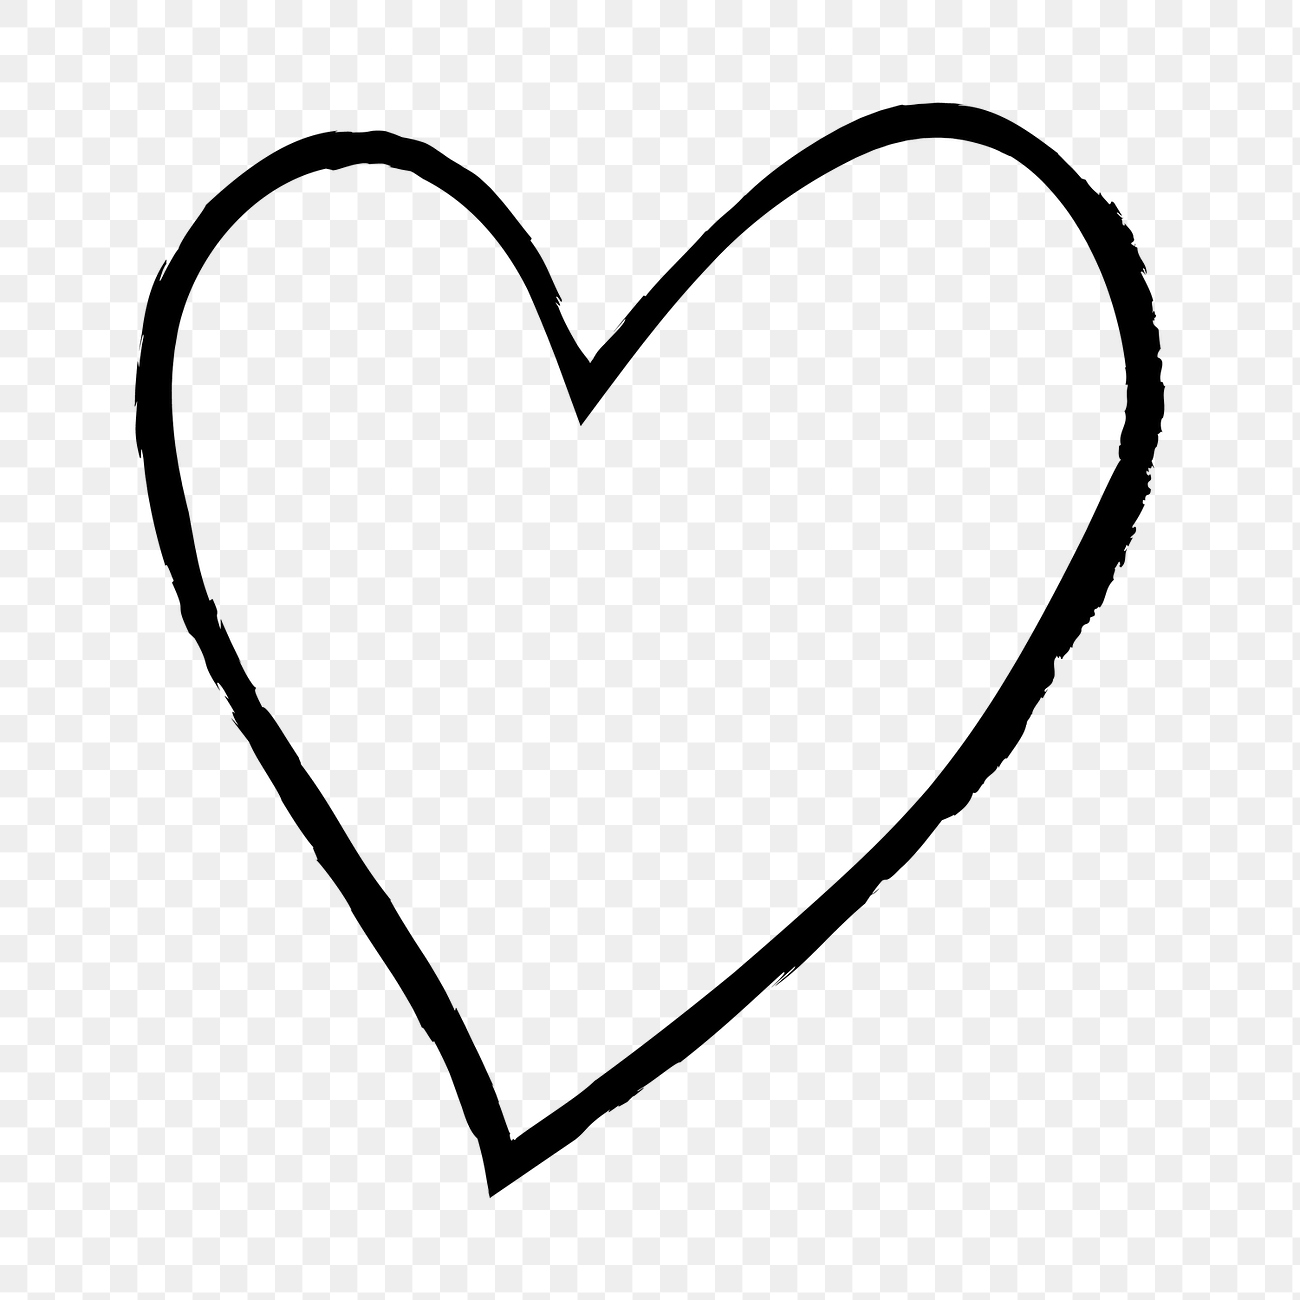 Png heart doodle icon, simple | Premium PNG - rawpixel